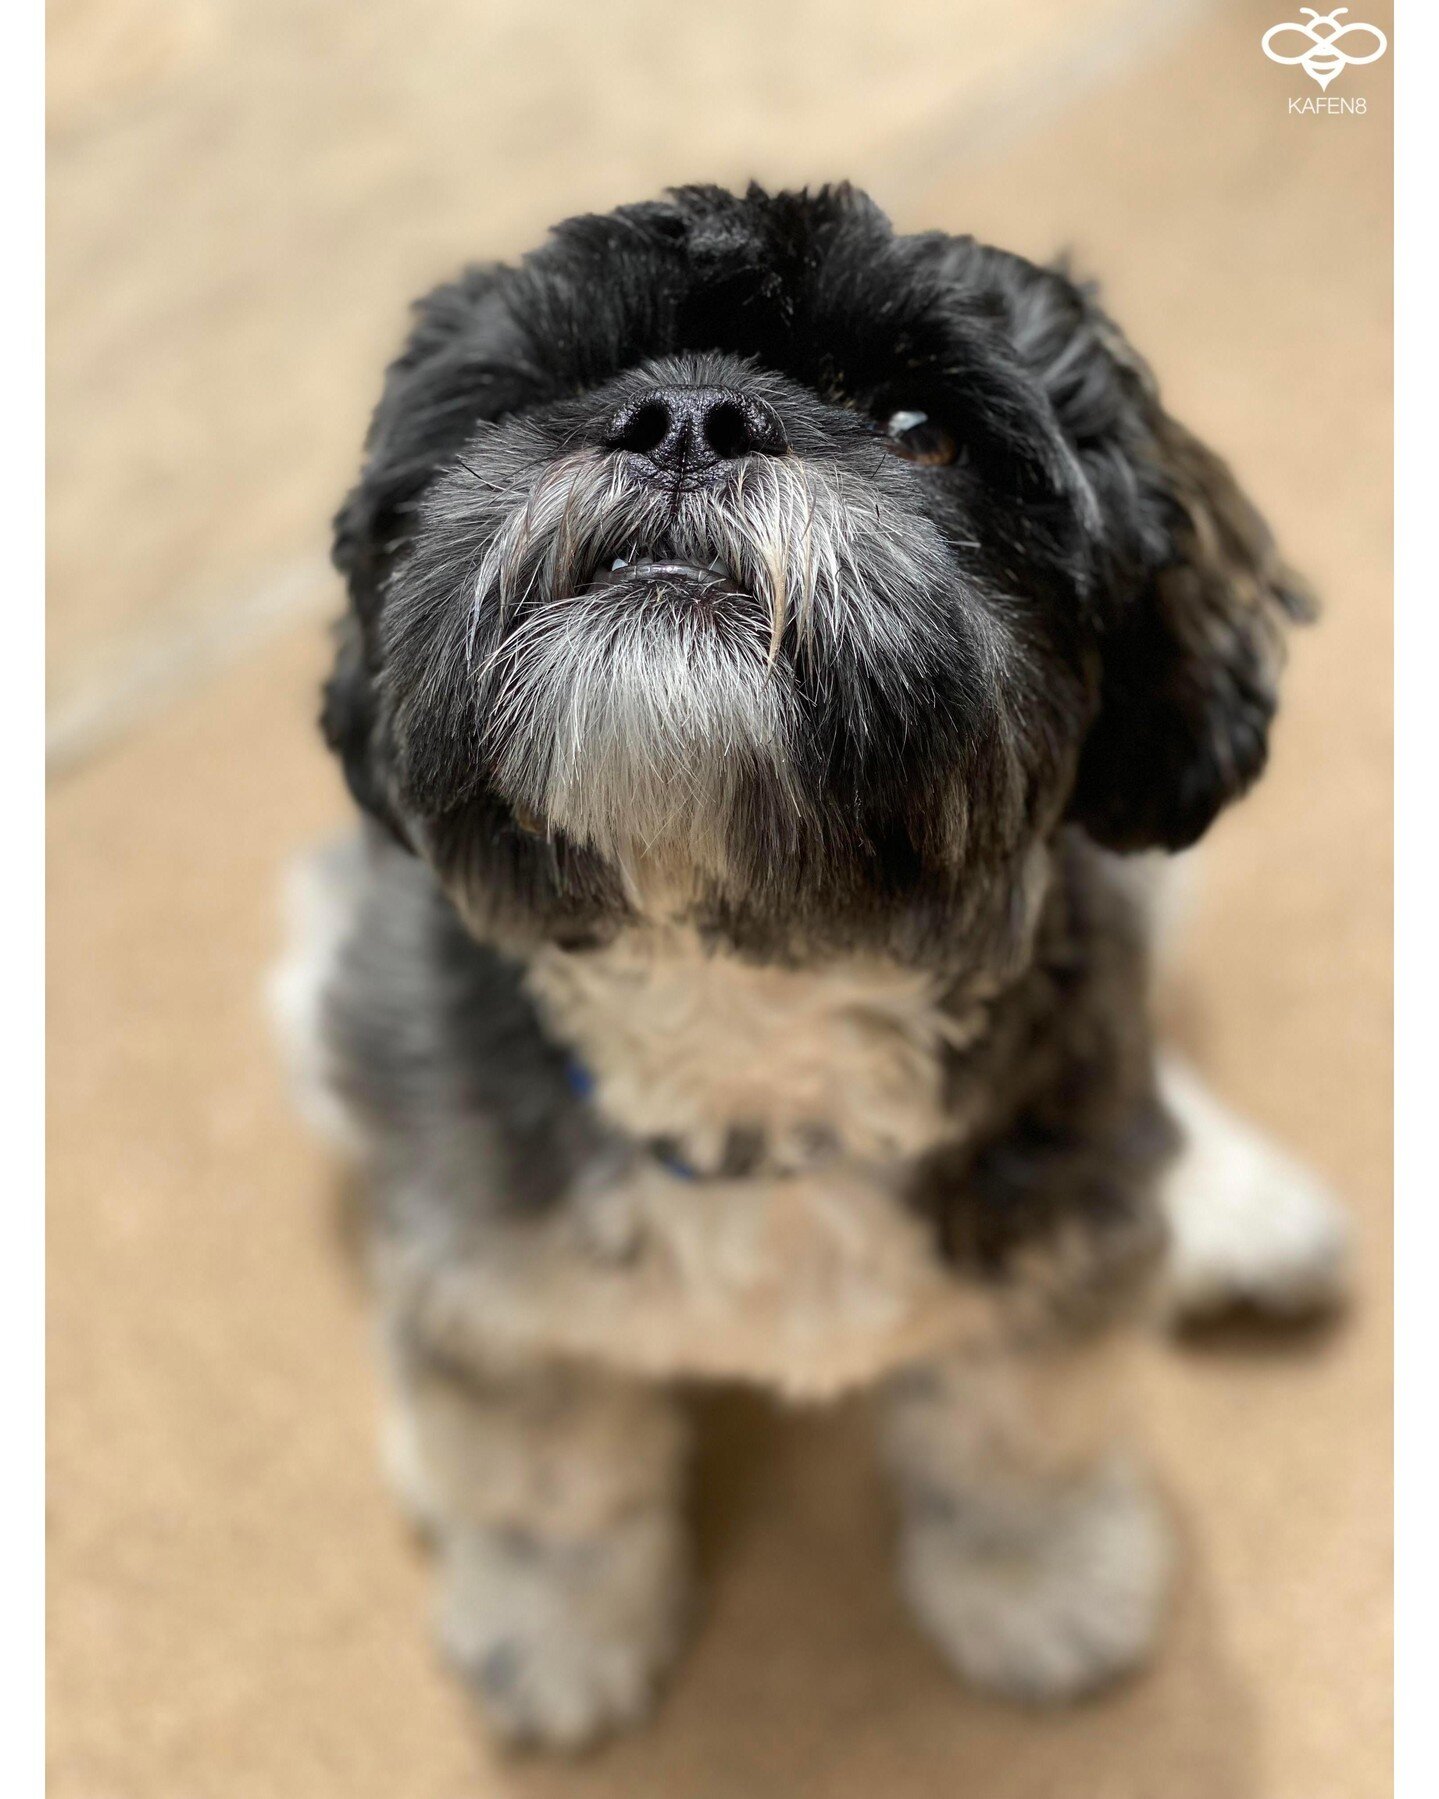 Happy National Dog Day from Chewy, Kafen8's cutest team member!

#nationaldogday #cute #puppylove #dogs #smallbizlife #Kafen8 #contentmarketingservices #smallbusinessconsulting #VideoMarketing #denvermarketing #coloradomarketing #digitalmarketconsult